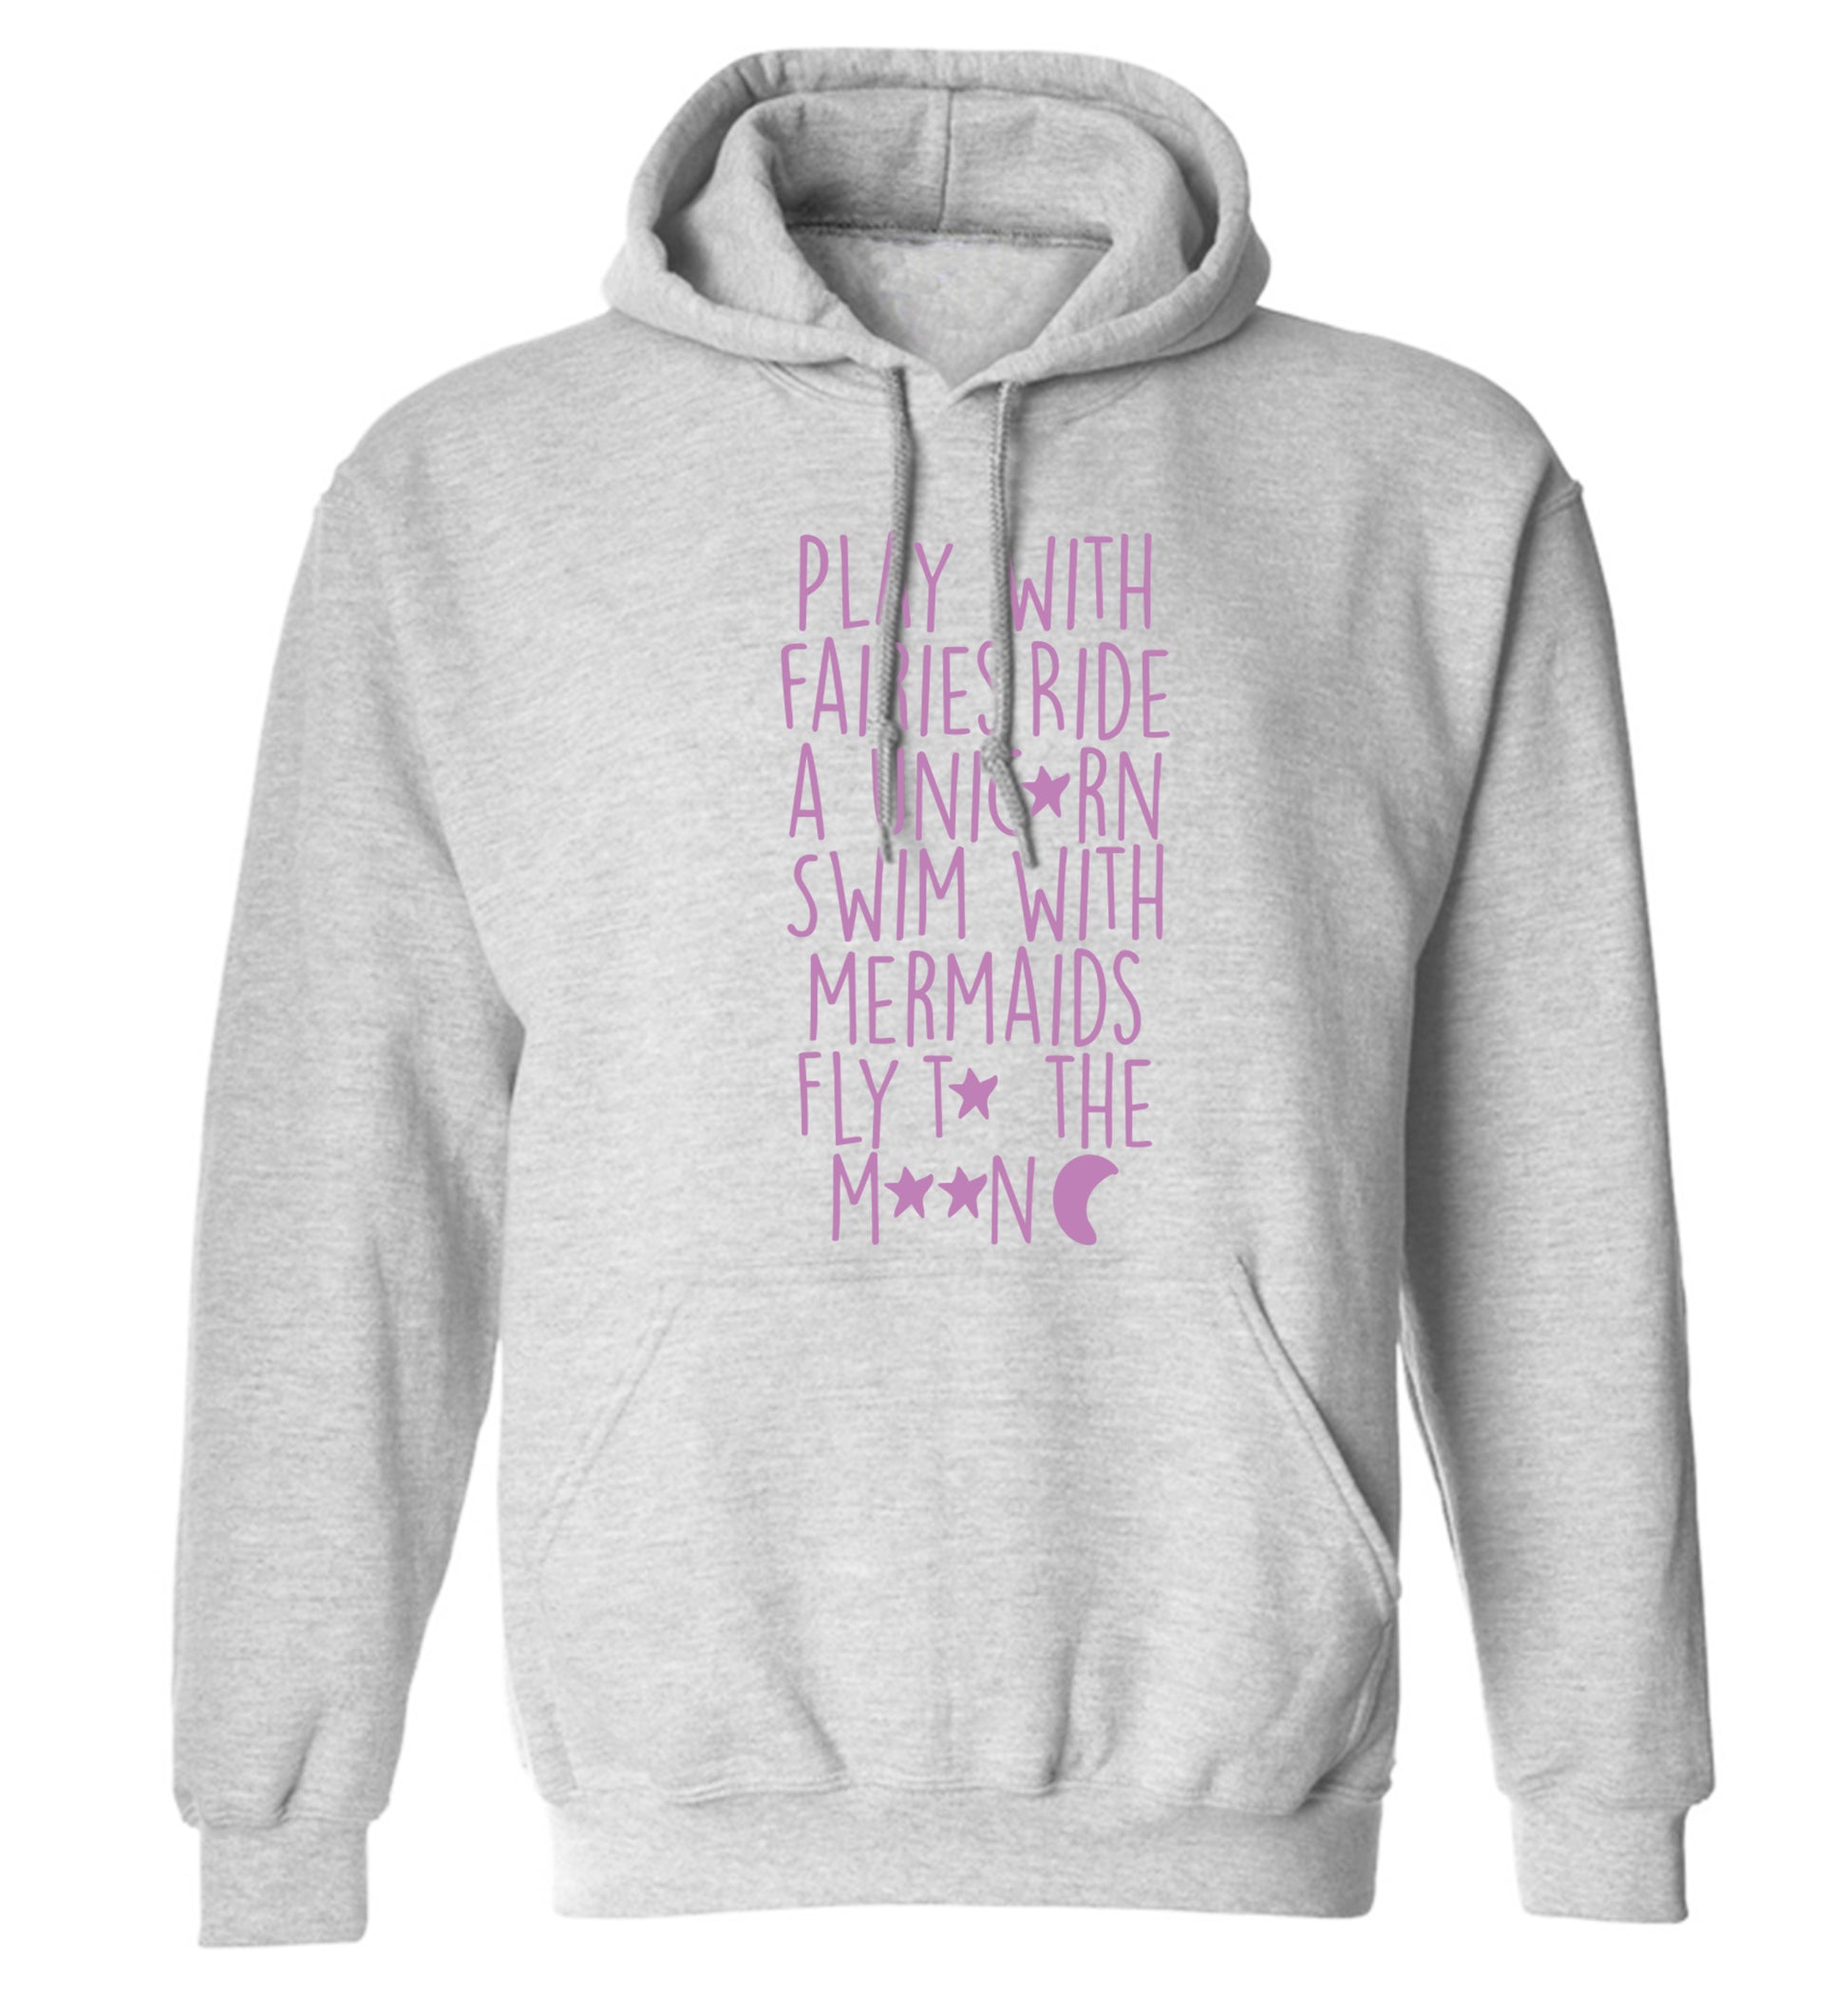 Play with fairies ride a unicorn swim with mermaids fly to the moon adults unisex grey hoodie 2XL